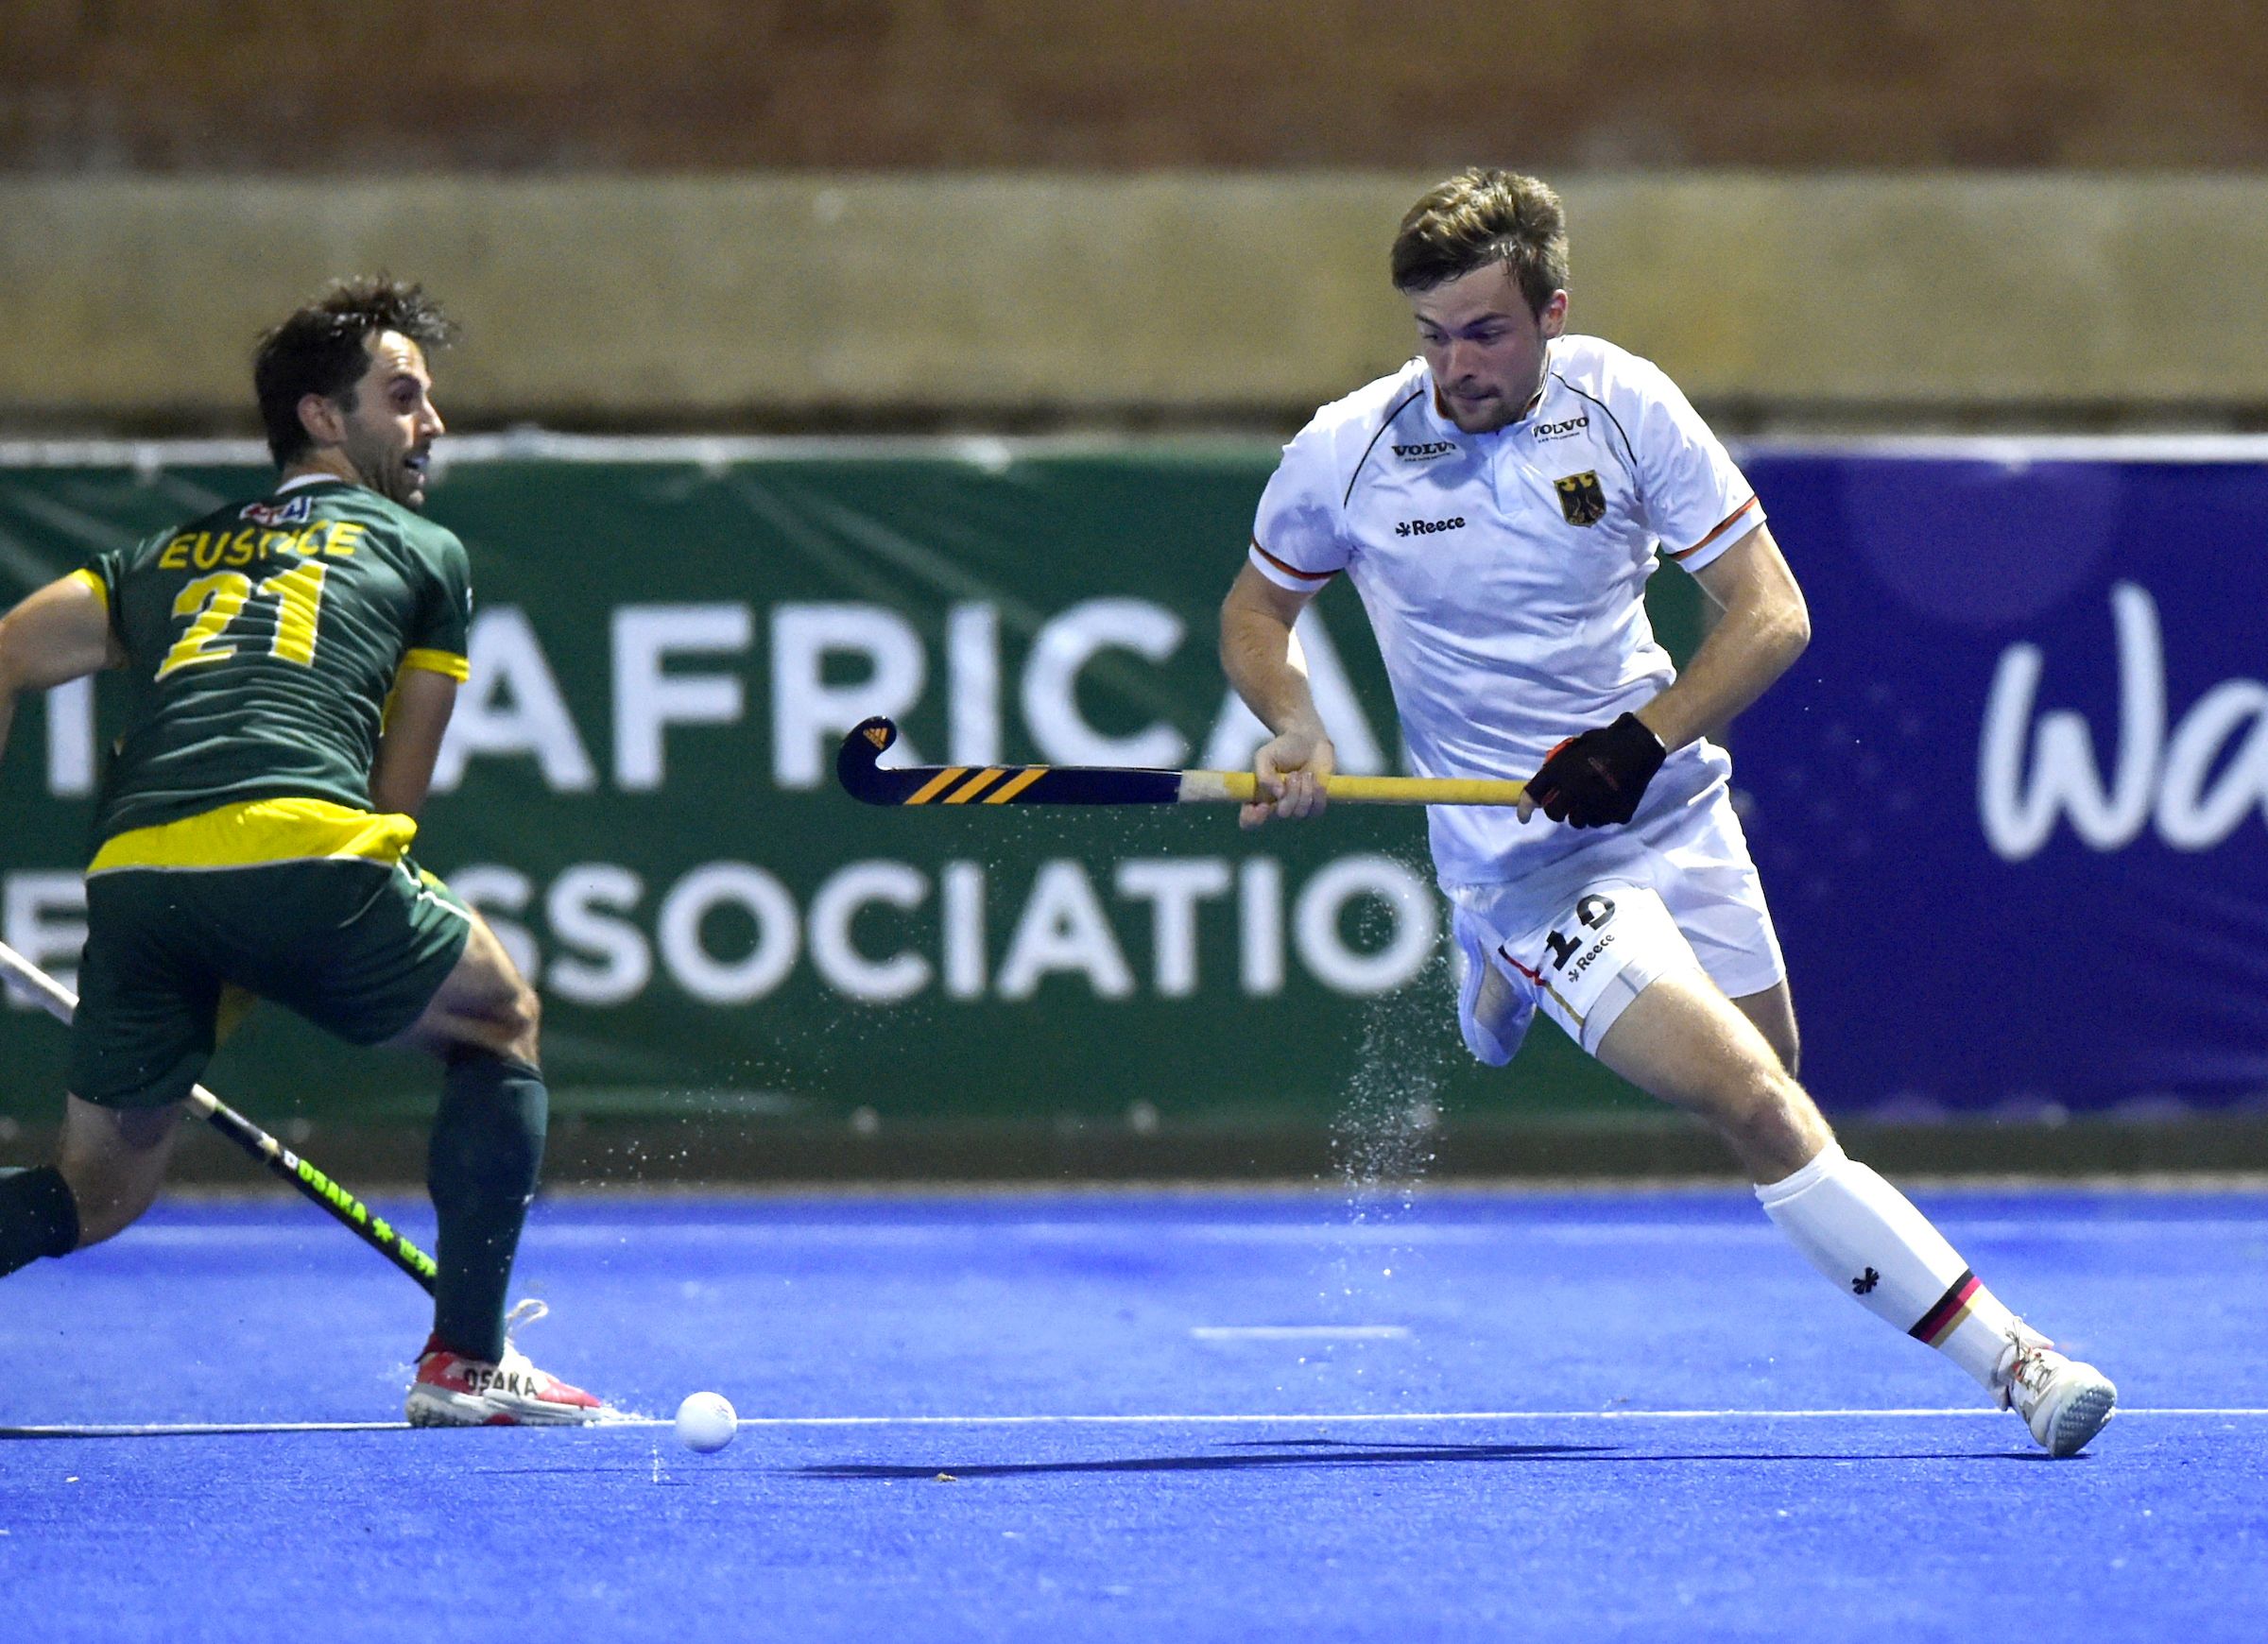 PL2 RSA GER D - 4 from 4 for Germany in Pro-League - The German men were the only team to win all four games at the Pro-League event in South Africa, which was played in tournament form for the first time. After the 3:2 and 4:2 over France and the 6:1 in the first